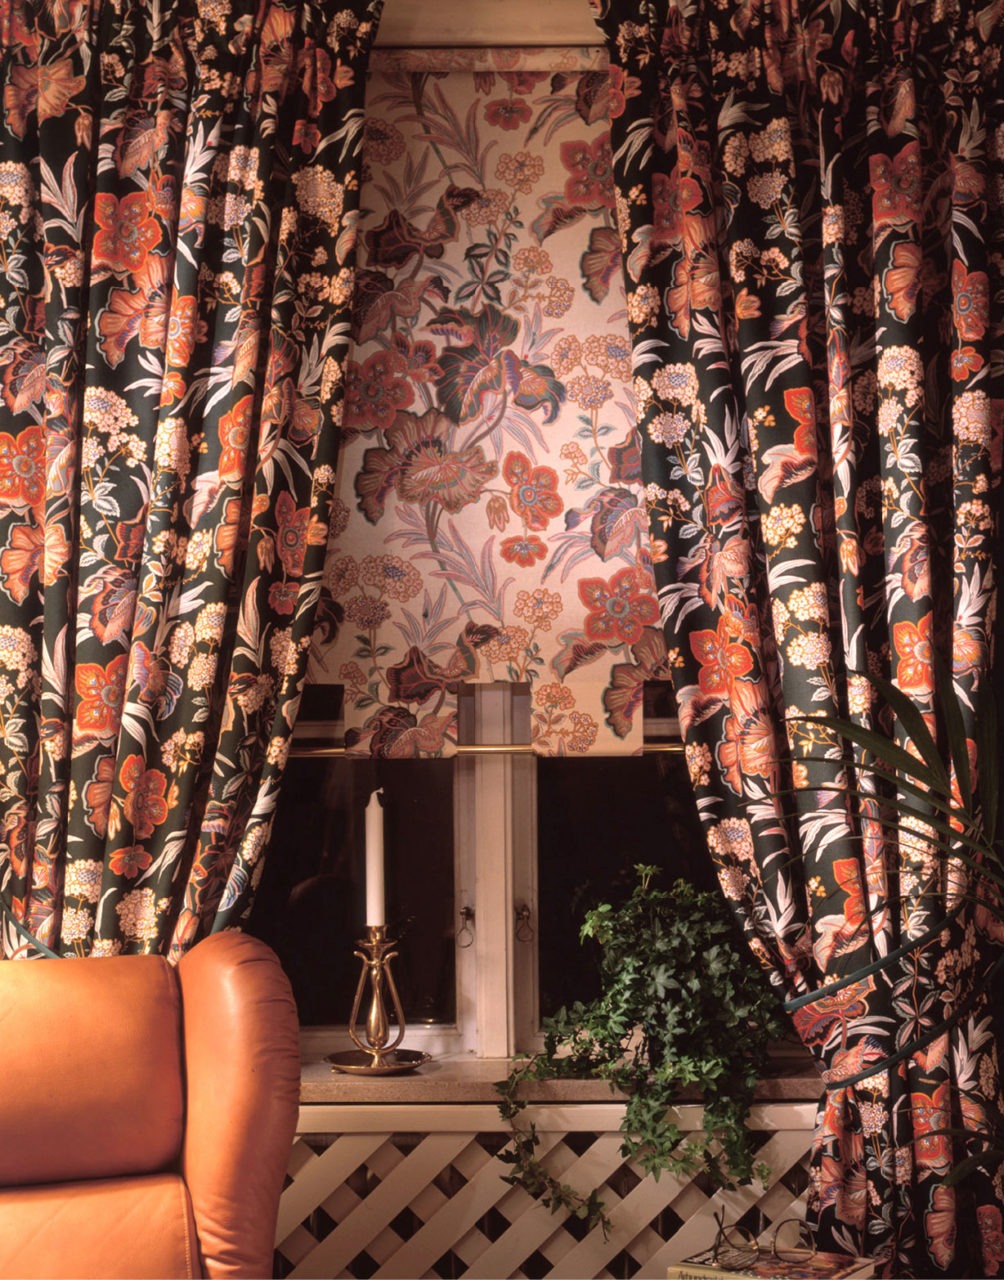 Several fabrics and curtains displayed, in floral patterns and solid colours.